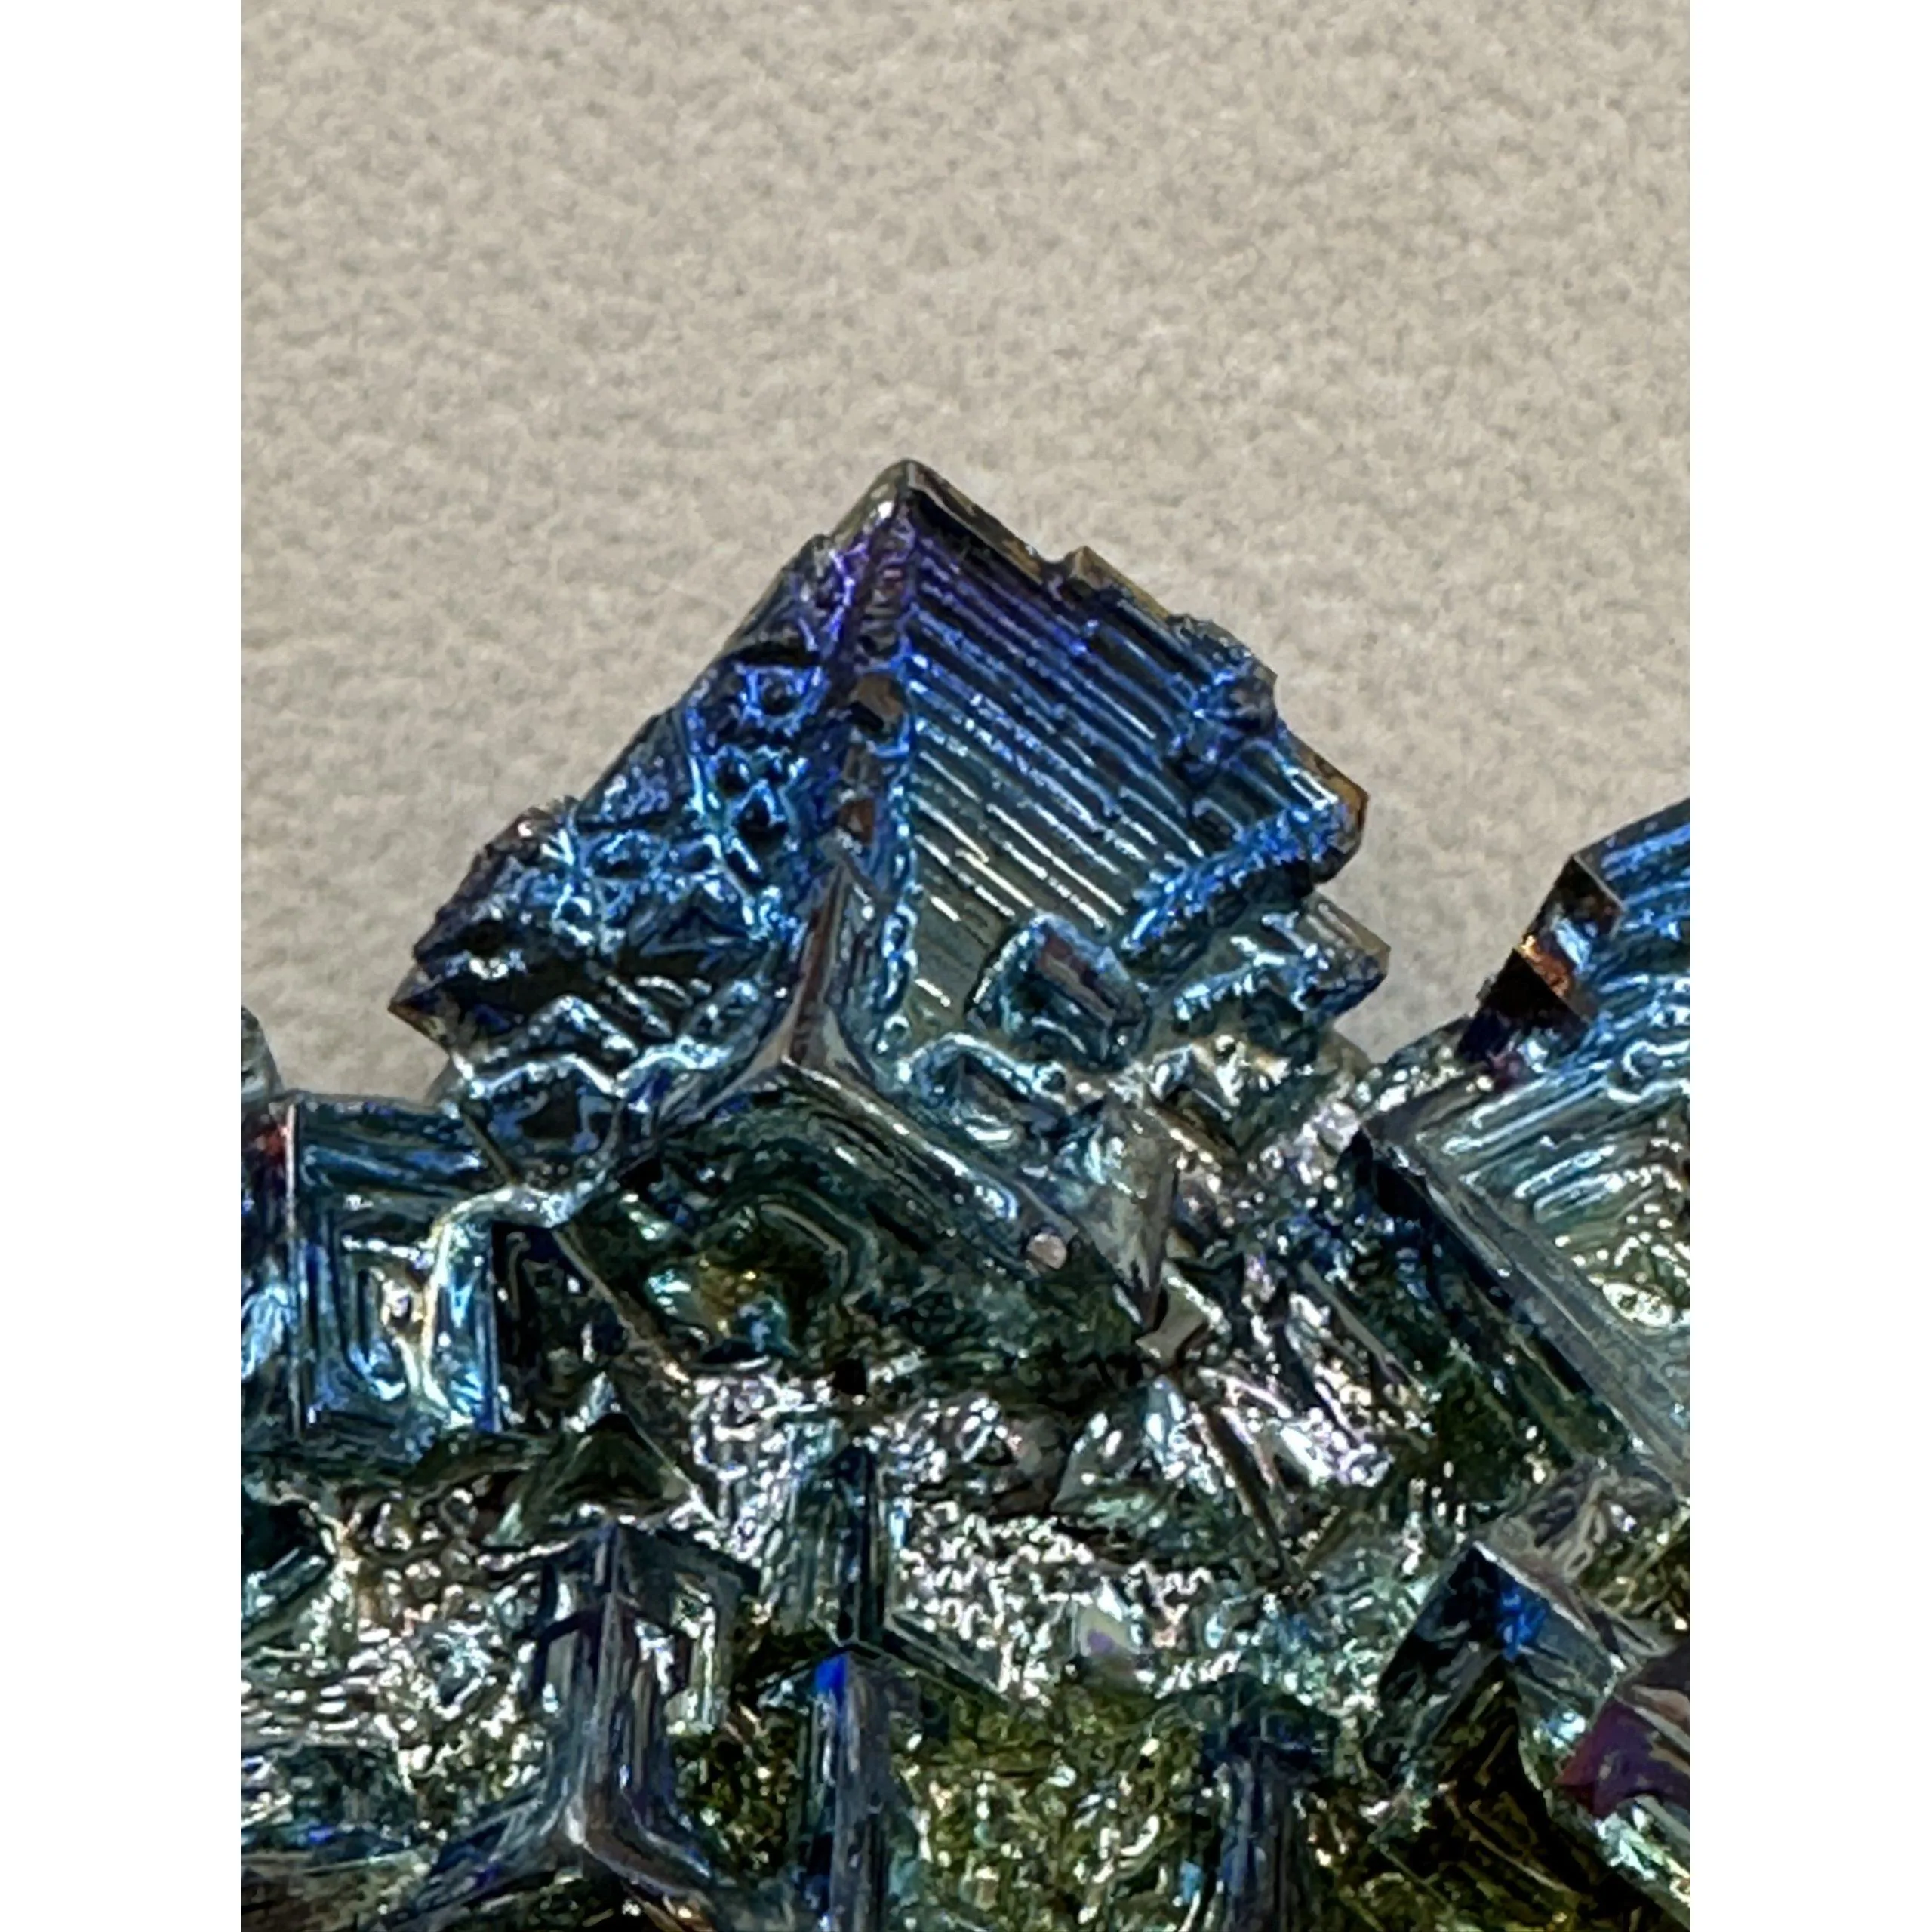 Bismuth, XL Collector Quality, beautiful shapes Prehistoric Online